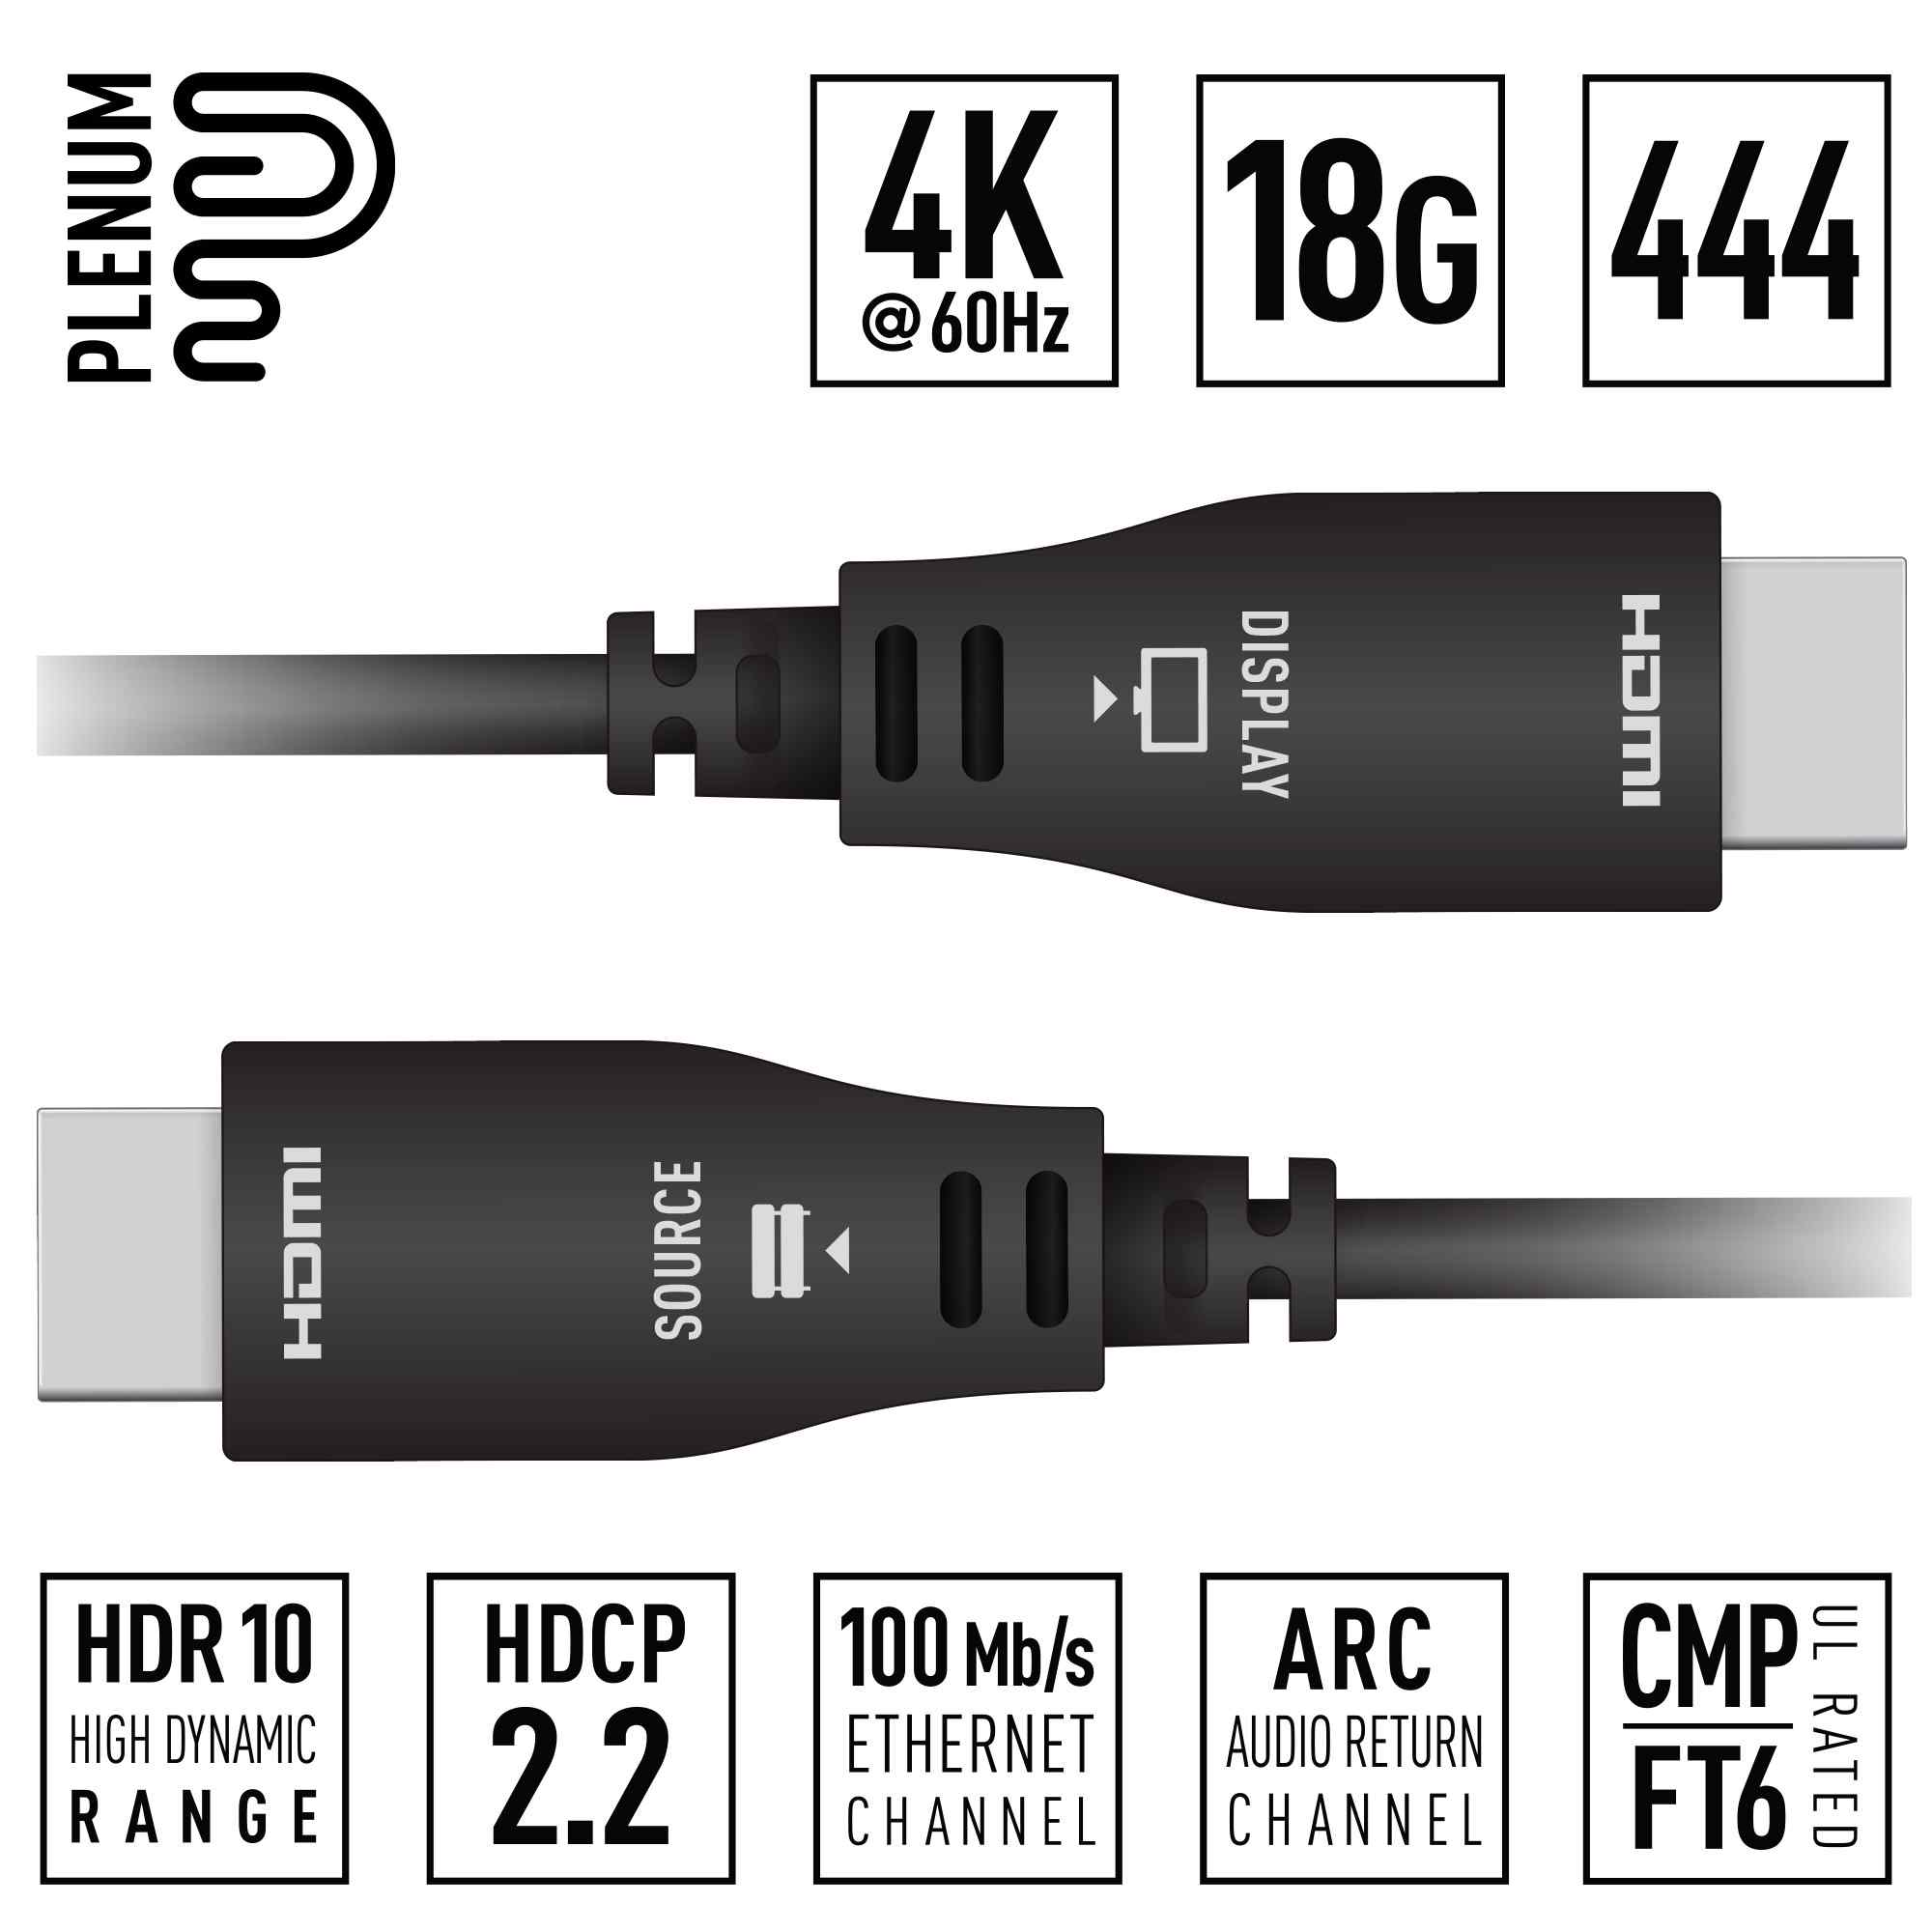 Key Digital 197FT (60M) 4K@60Hz/444/18G - Plenum Active Optical HDMI Cable, CMP/FT6 UL Rated - KD-AOCH197P